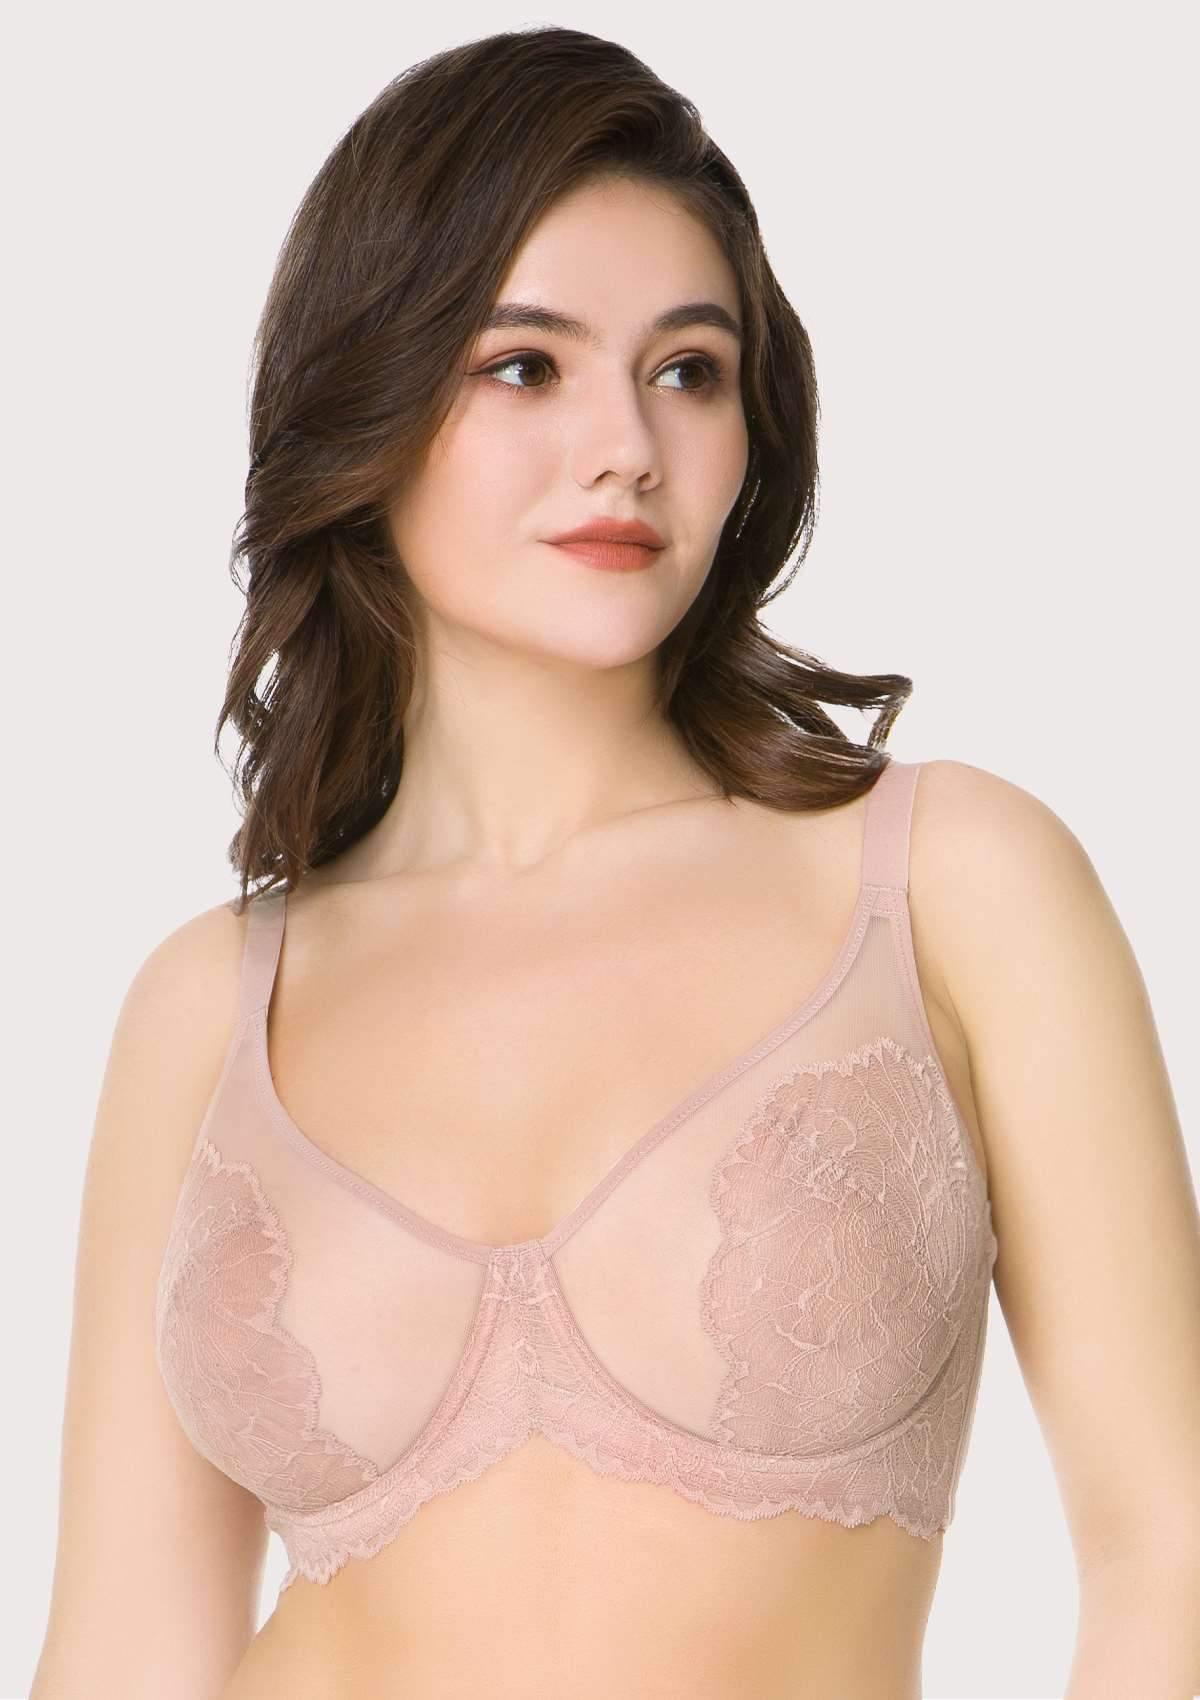 HSIA Blossom Lace Bra And Panties Set: Best Bra For Large Busts - Dark Pink / 38 / H